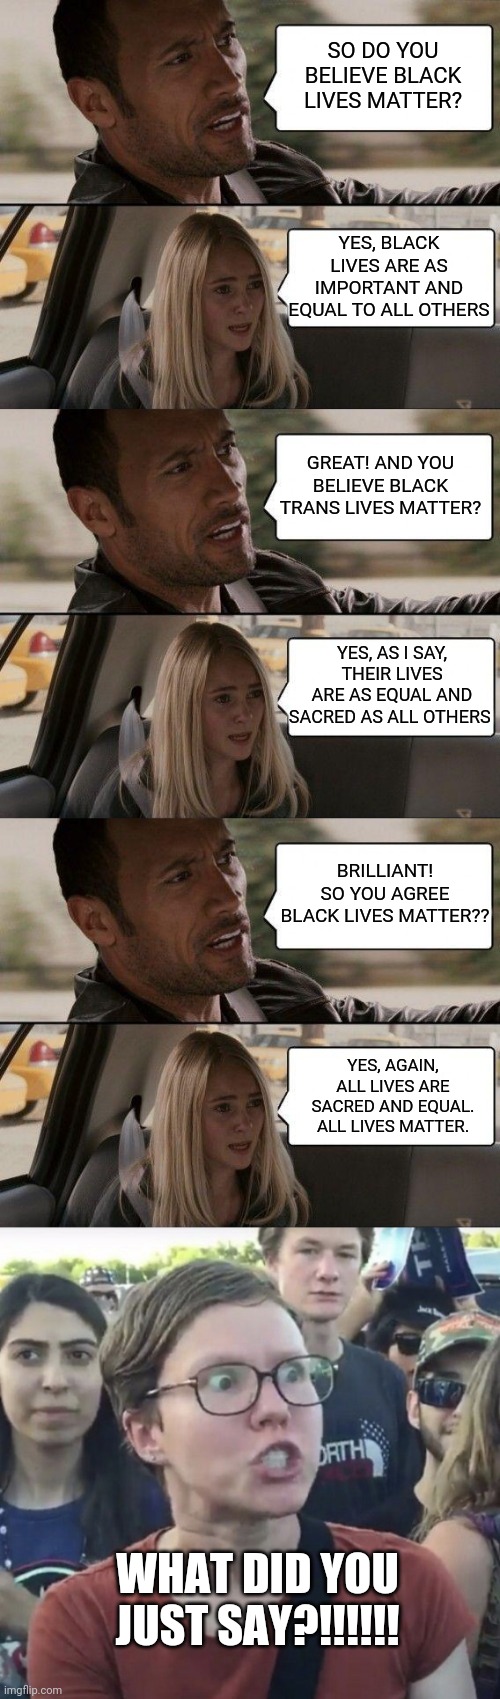 Clearly seeing all people as human, and not differentiating or distinguishing a person by their race, is now racist. | SO DO YOU BELIEVE BLACK LIVES MATTER? YES, BLACK LIVES ARE AS IMPORTANT AND EQUAL TO ALL OTHERS; GREAT! AND YOU BELIEVE BLACK TRANS LIVES MATTER? YES, AS I SAY, THEIR LIVES ARE AS EQUAL AND SACRED AS ALL OTHERS; BRILLIANT! SO YOU AGREE BLACK LIVES MATTER?? YES, AGAIN, ALL LIVES ARE SACRED AND EQUAL. ALL LIVES MATTER. WHAT DID YOU JUST SAY?!!!!!! | image tagged in 2020 ladies and gentlemen | made w/ Imgflip meme maker